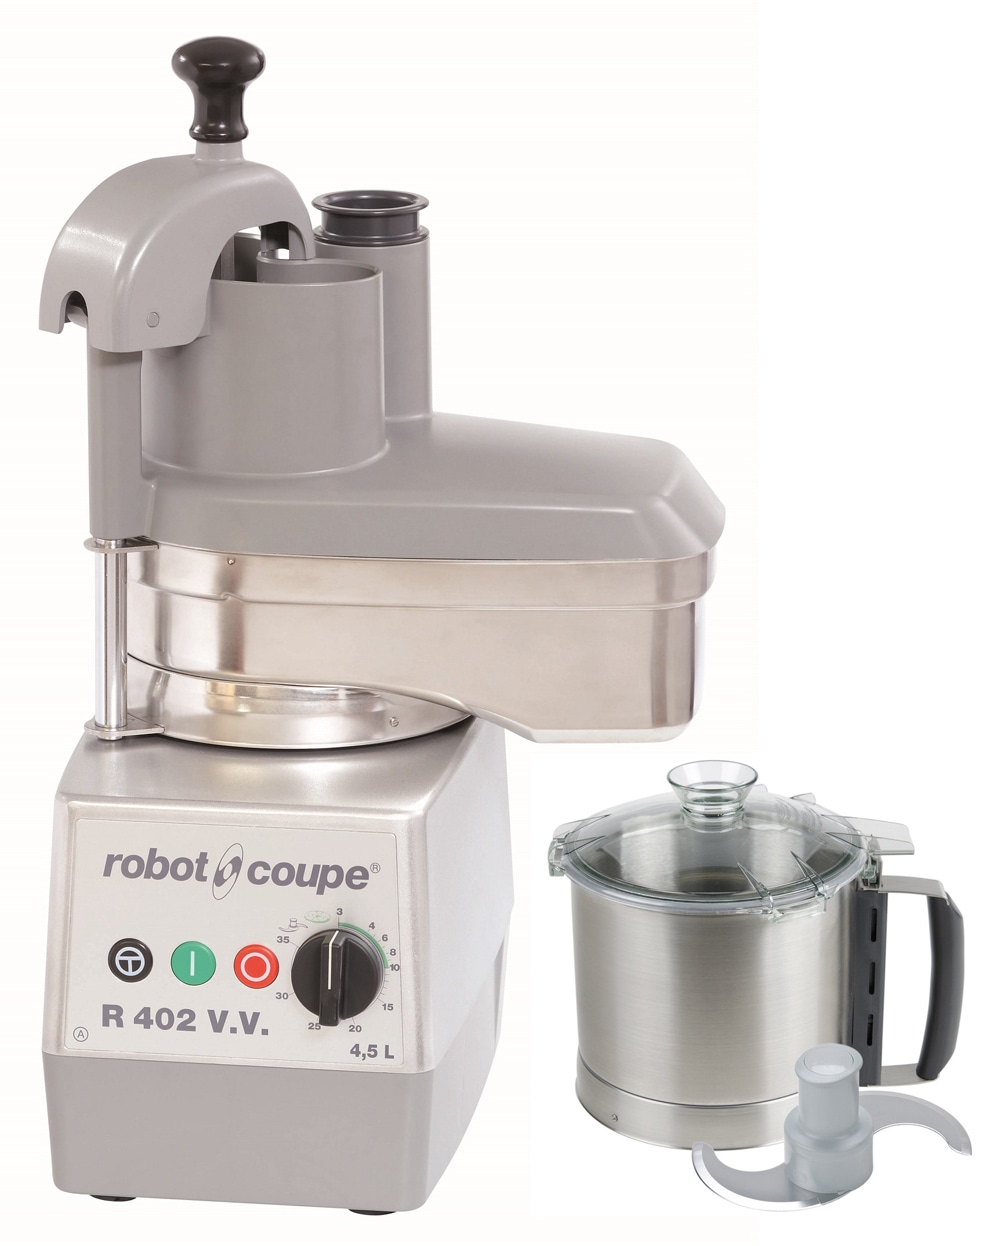 Robot Coupe 2HP  4.5 Qt. Combination Food Processor With 3 Attachments - R402